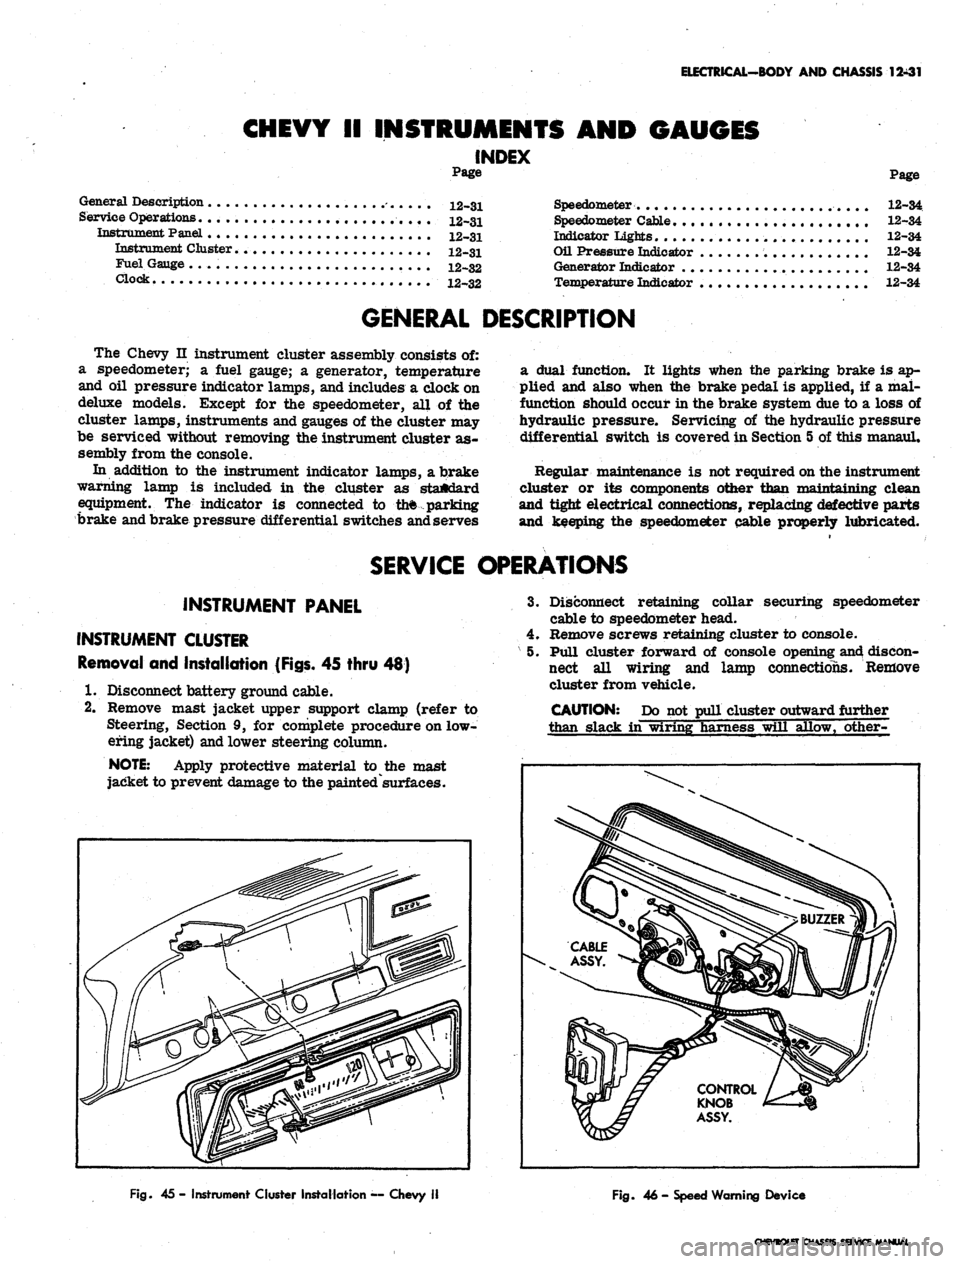 CHEVROLET CAMARO 1967 1.G Chassis Workshop Manual 
ELECTRICAL-BODY
 AND
 CHASSIS
 12-31

CHEVY II INSTRUMENTS AND GAUGES

INDEX

Page 
Page

General Description -.....
 12-31

Service Operations.
 12-31

Instrument Panel
 . 12-31

Instrument Cluster
